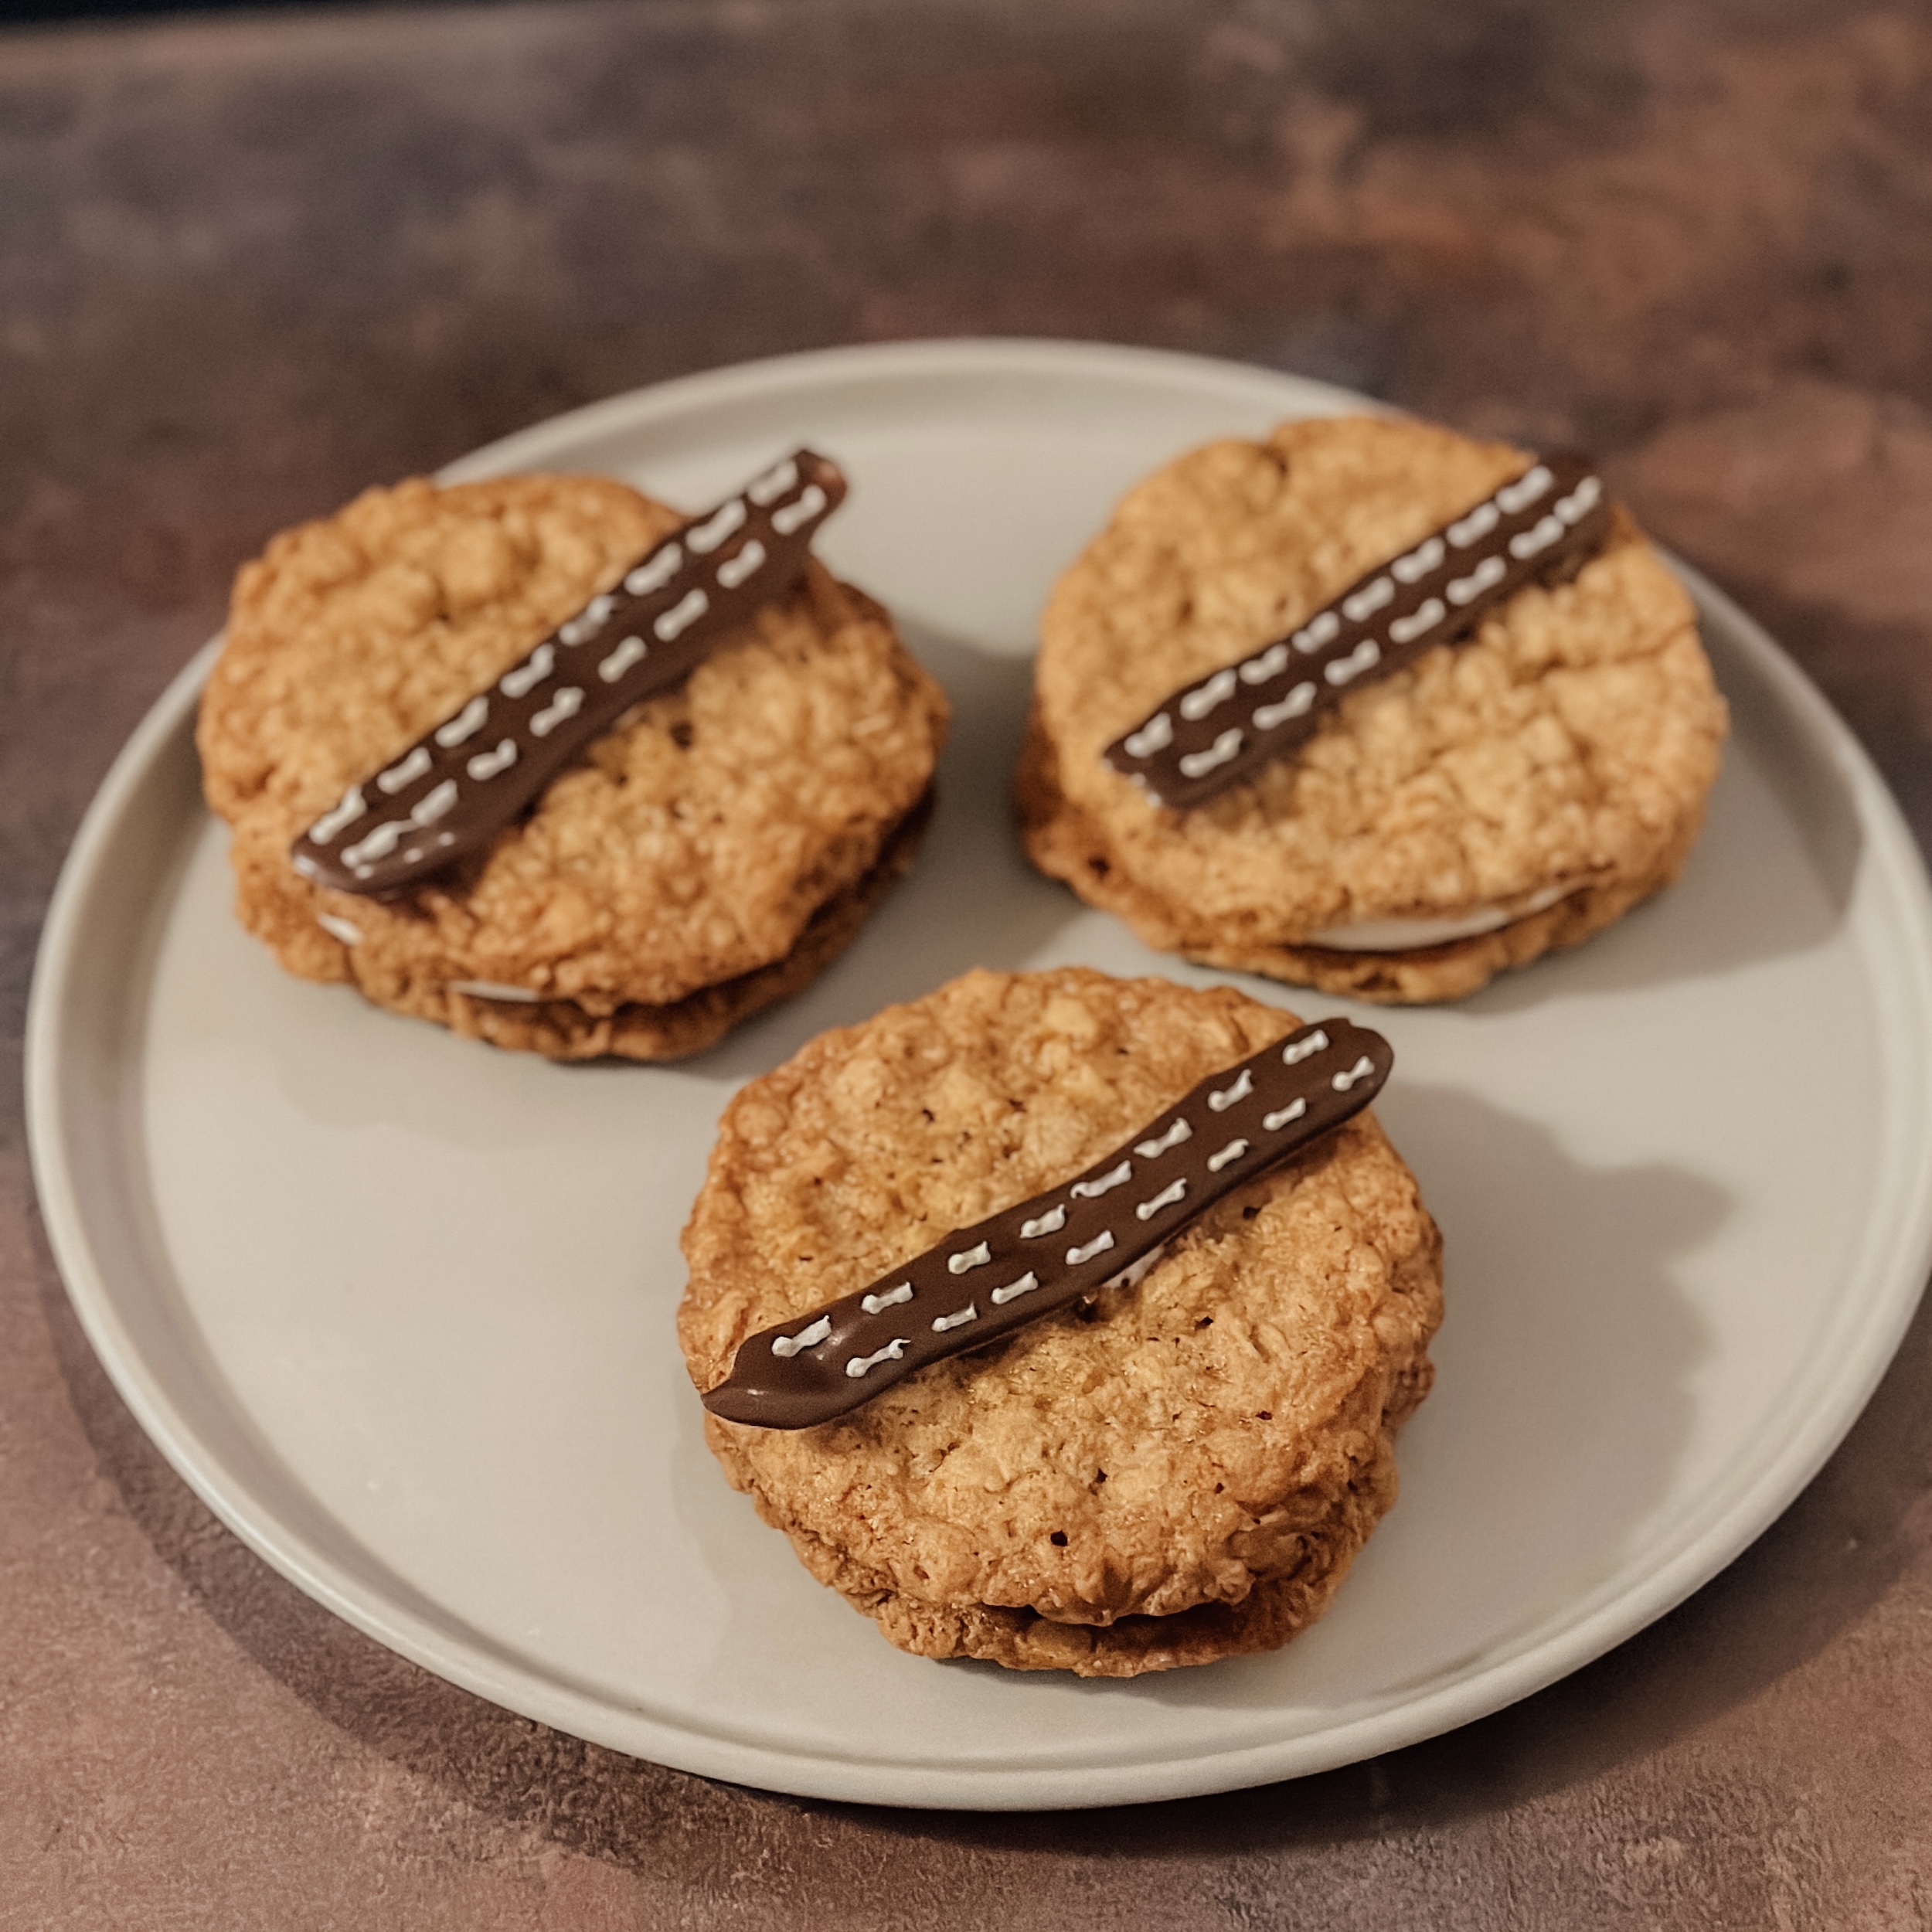 Wookie Cookie Sandwiches (oatmeal cookie sandwiches with marshmallow filling and chocolate decoration)